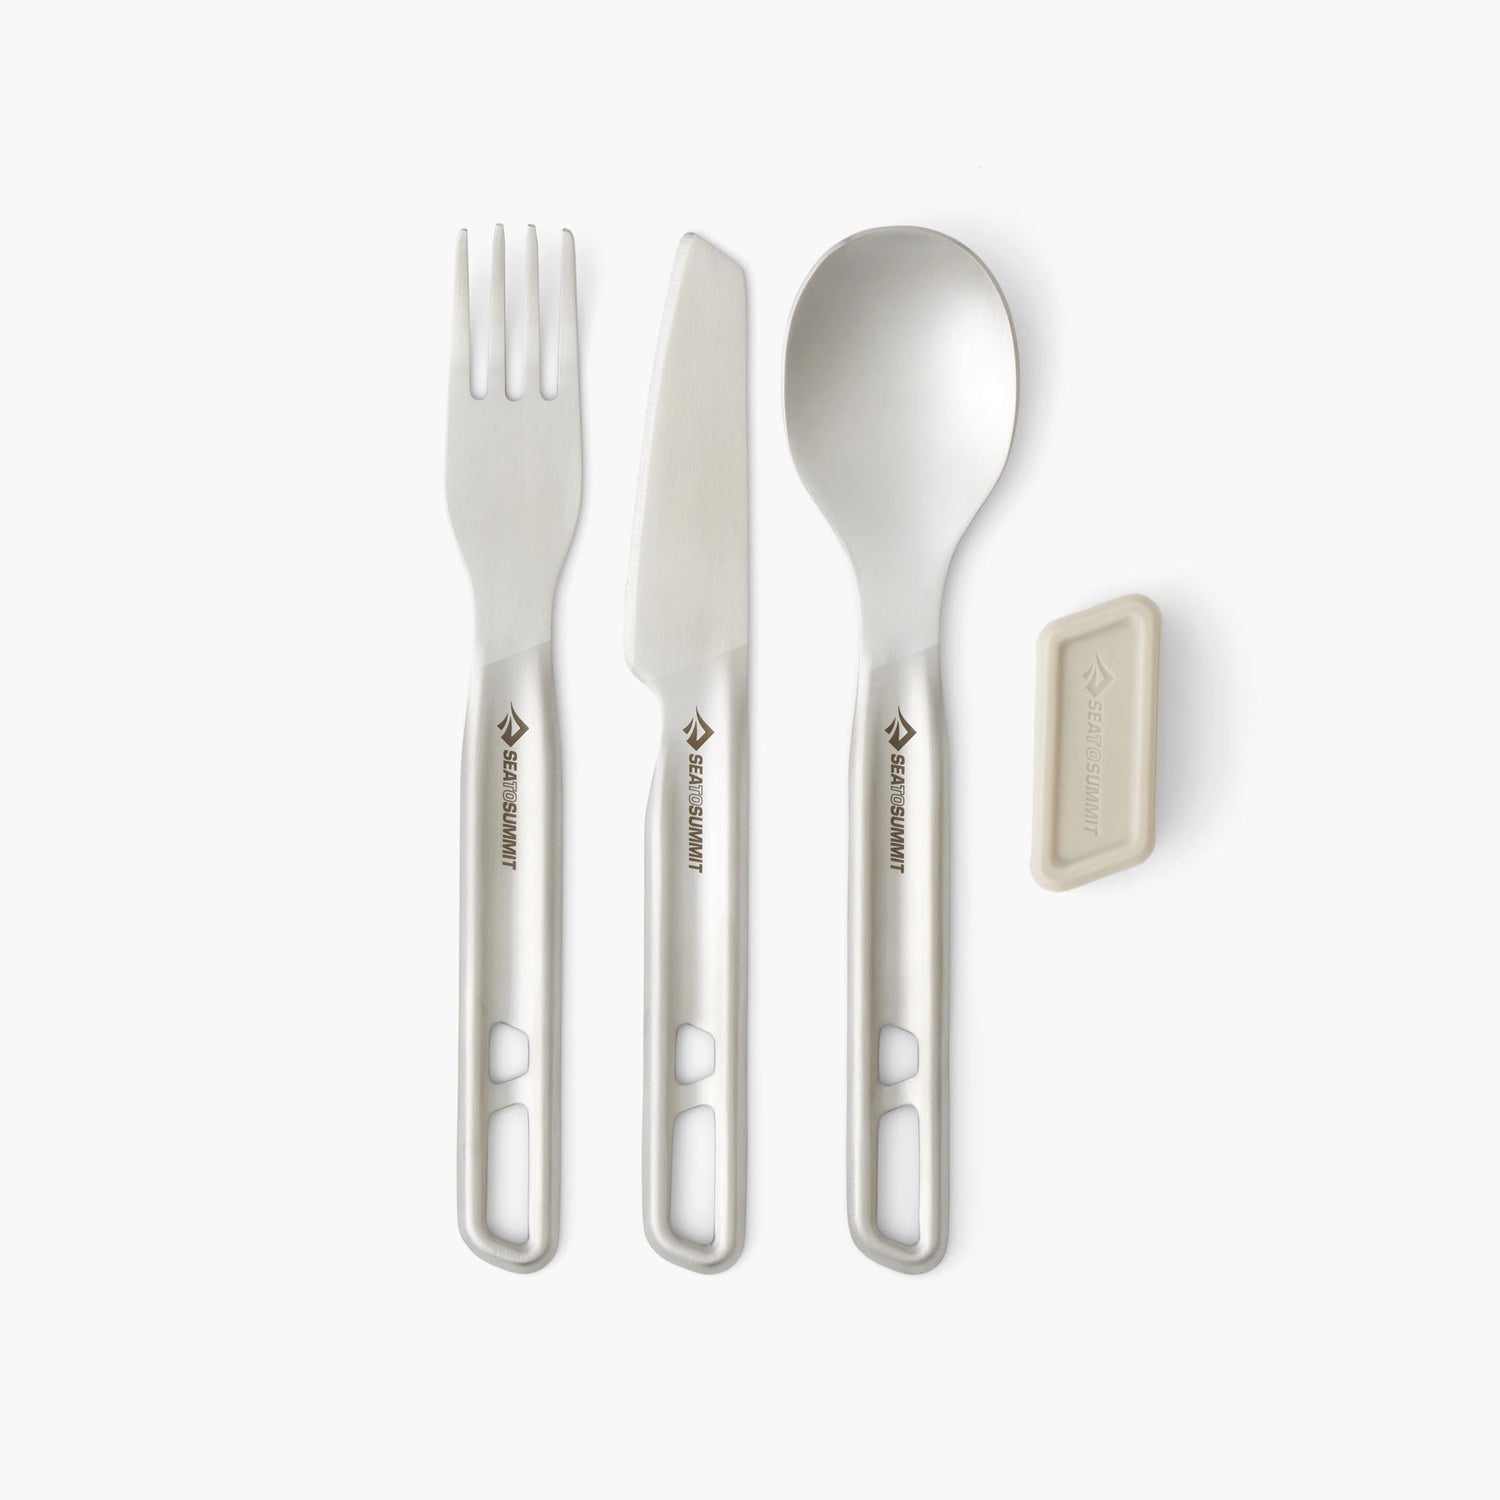 Detour Stainless Steel Cutlery Set (1 Person 3 Piece)